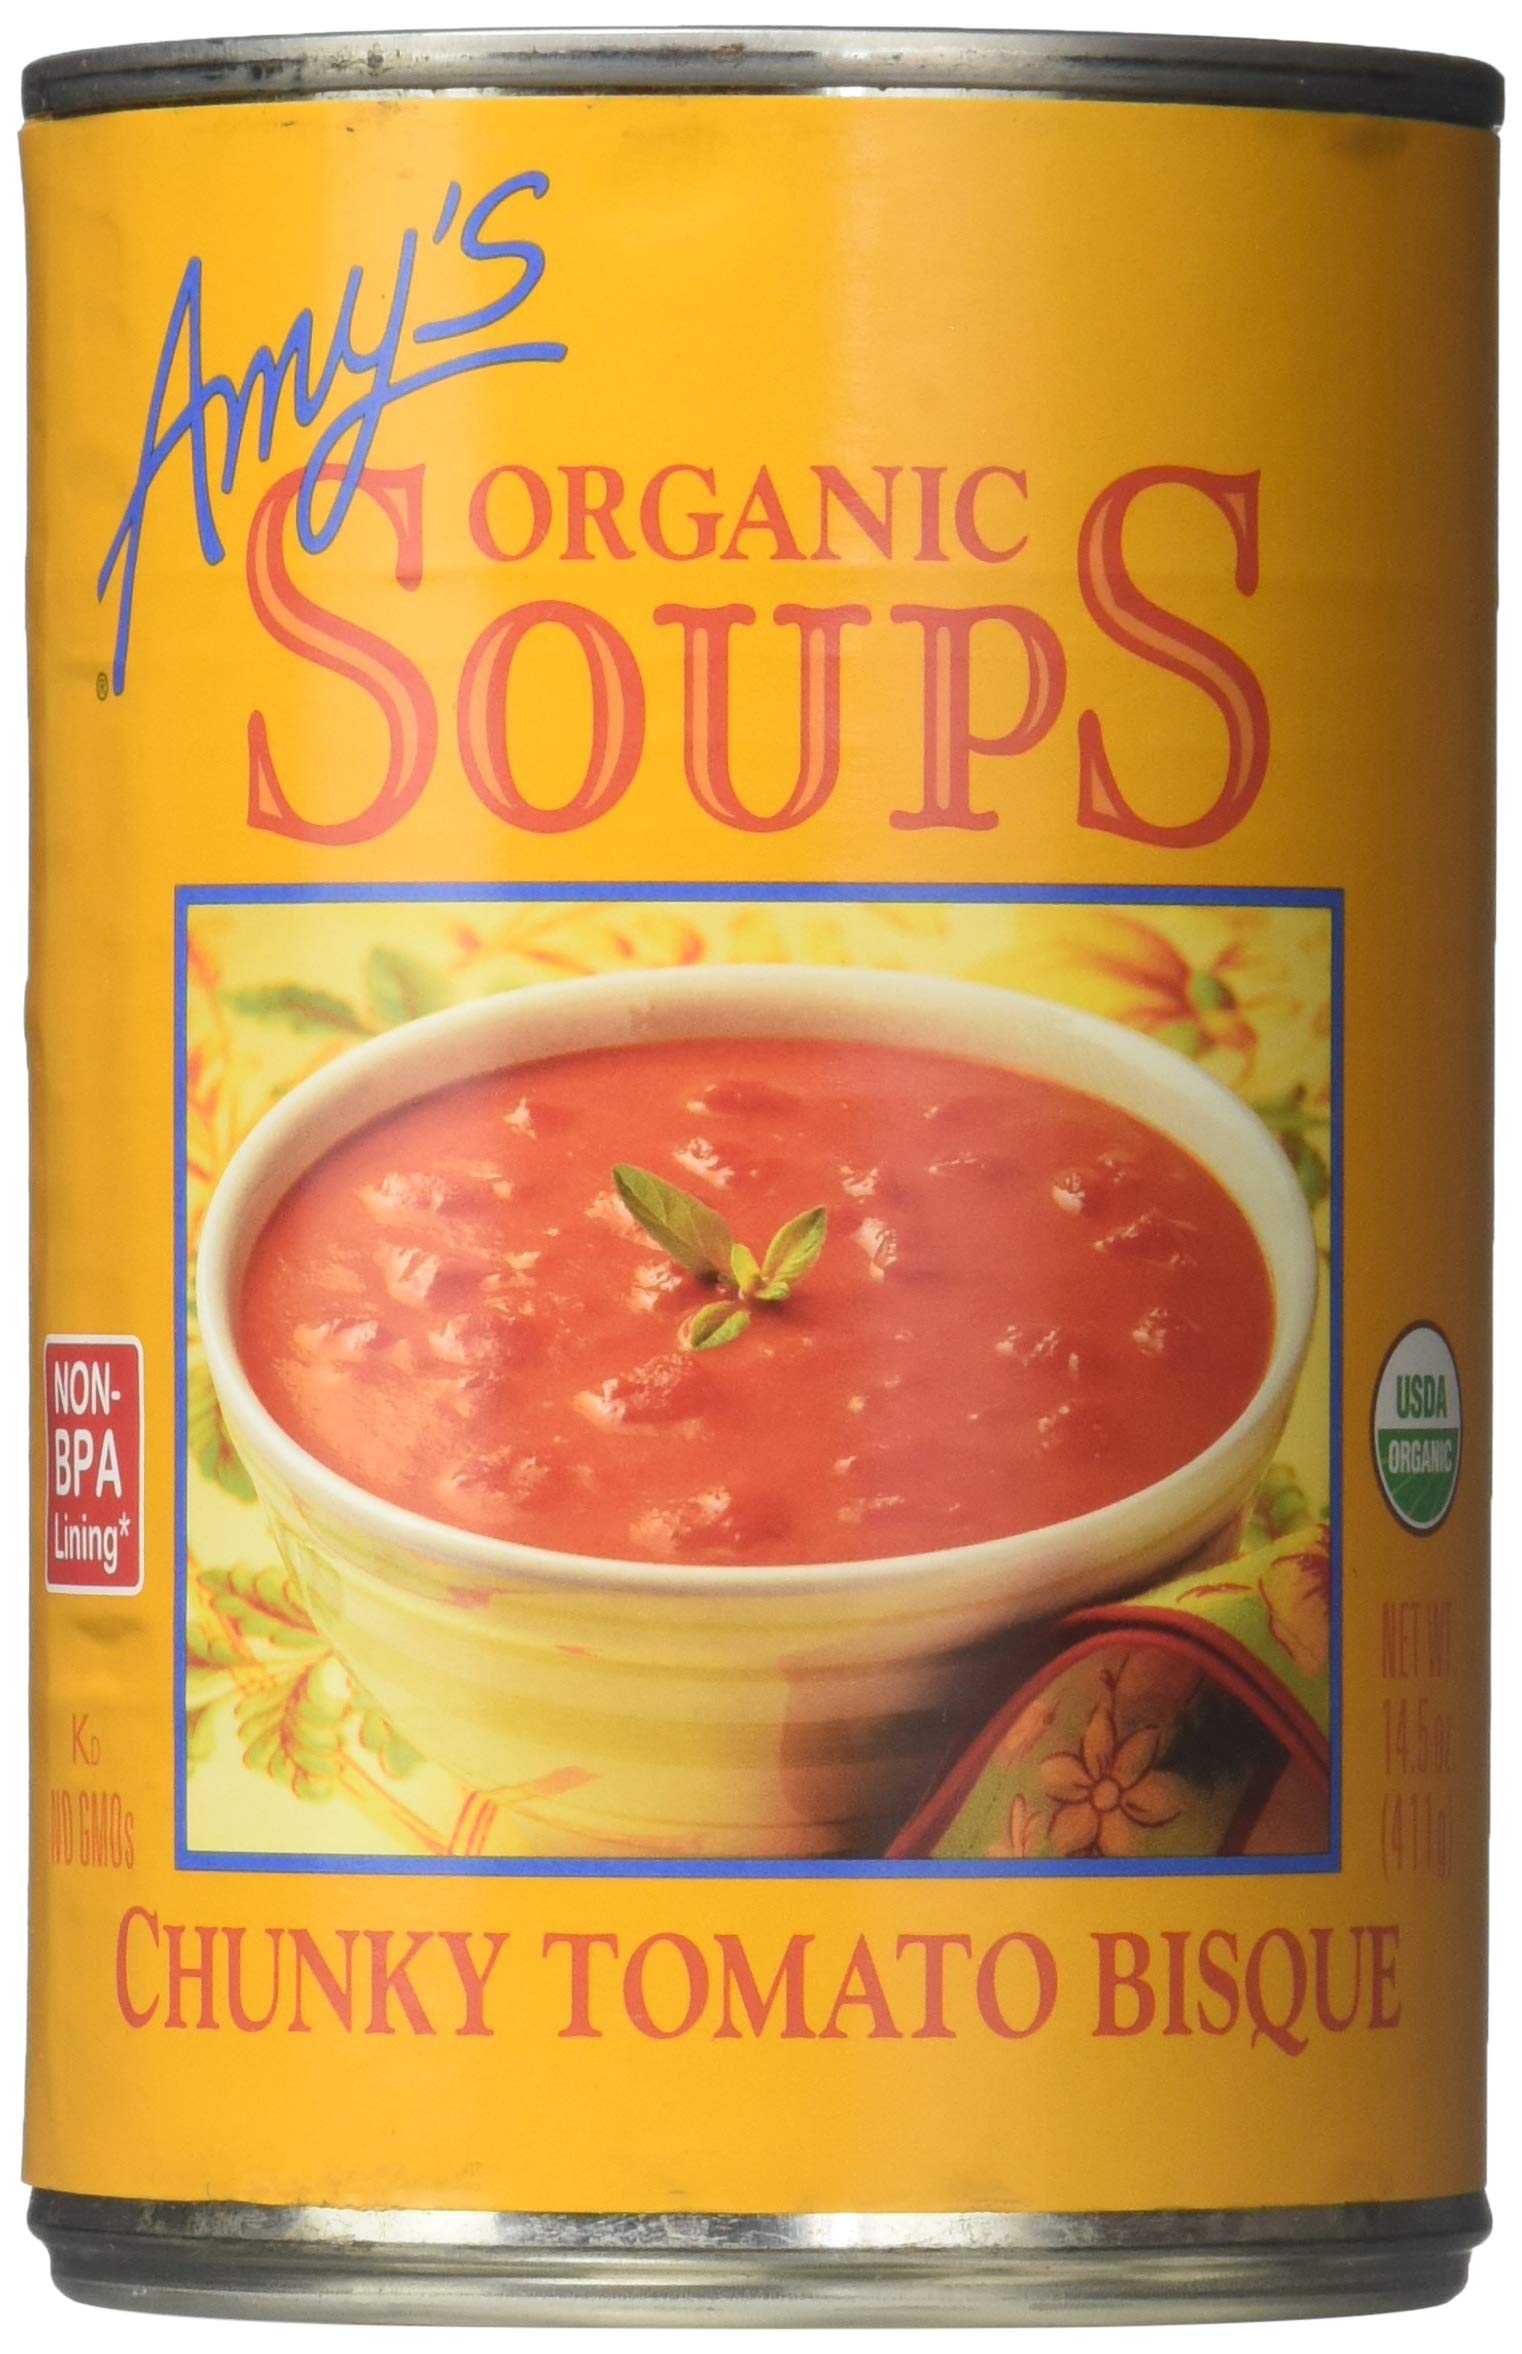 Amy's Soup Tomato Bisque Chunky Gf (Pack of 12)